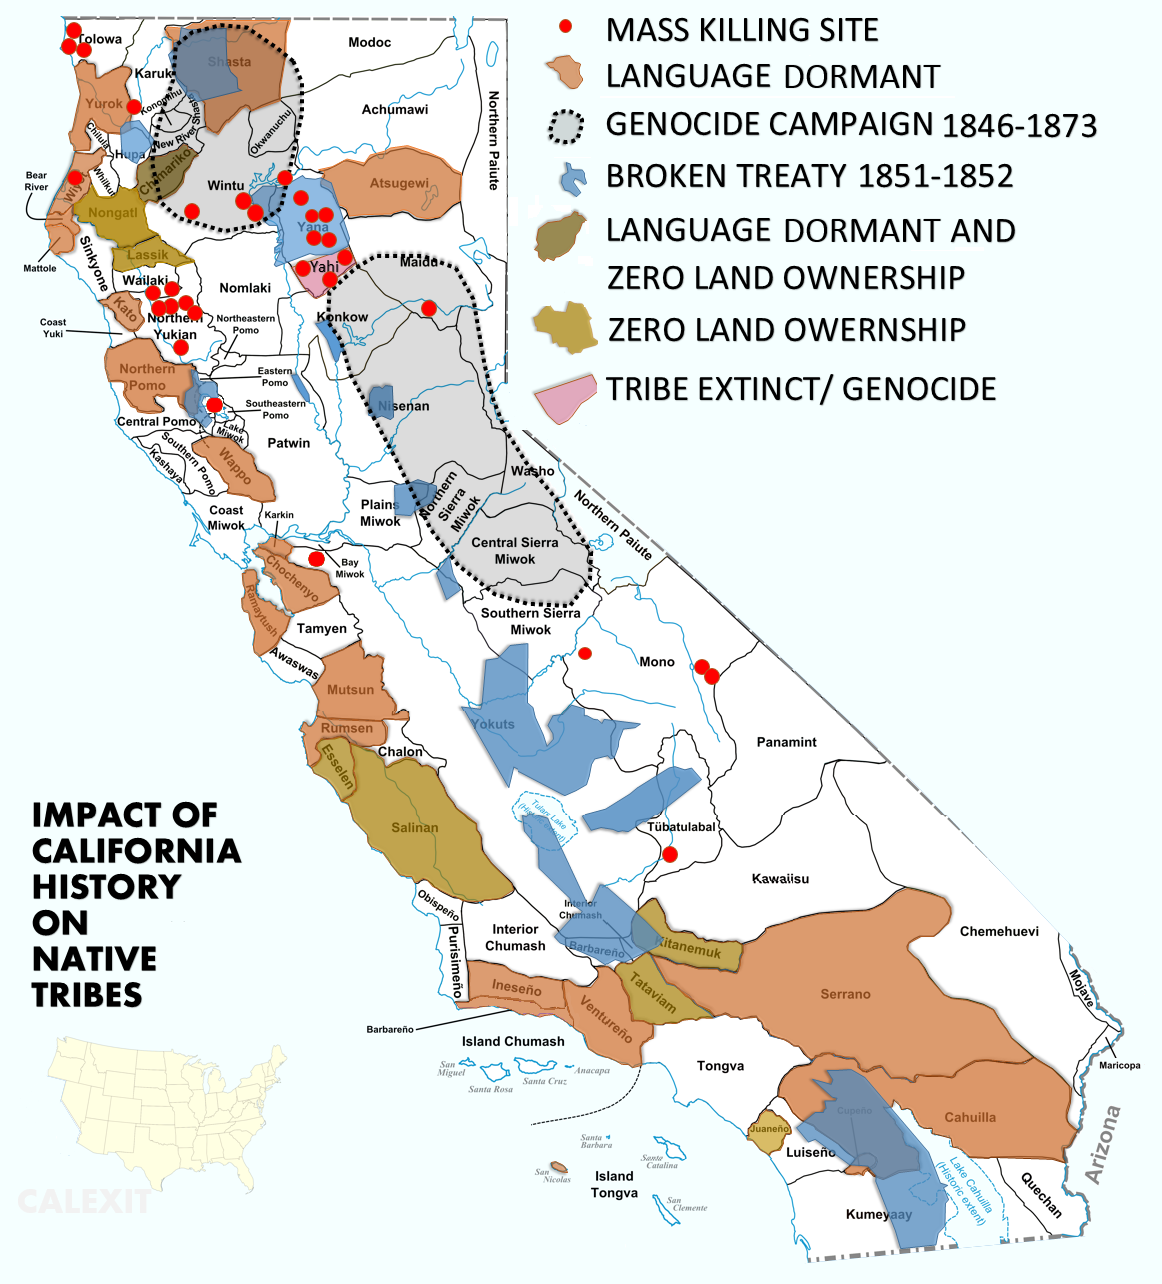 The collective impact of California history on Native/Indigenous Tribes.